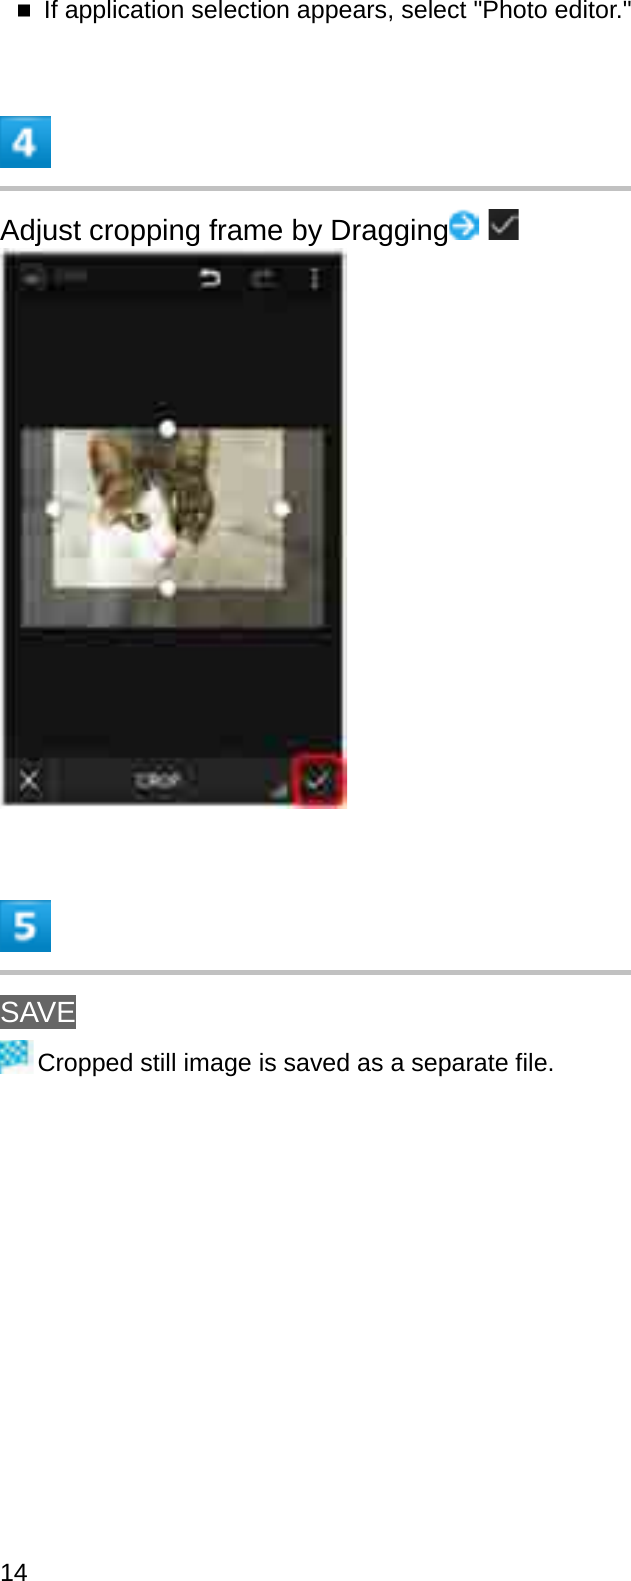 If application selection appears, select &quot;Photo editor.&quot;Adjust cropping frame by DraggingSAVECropped still image is saved as a separate file.14